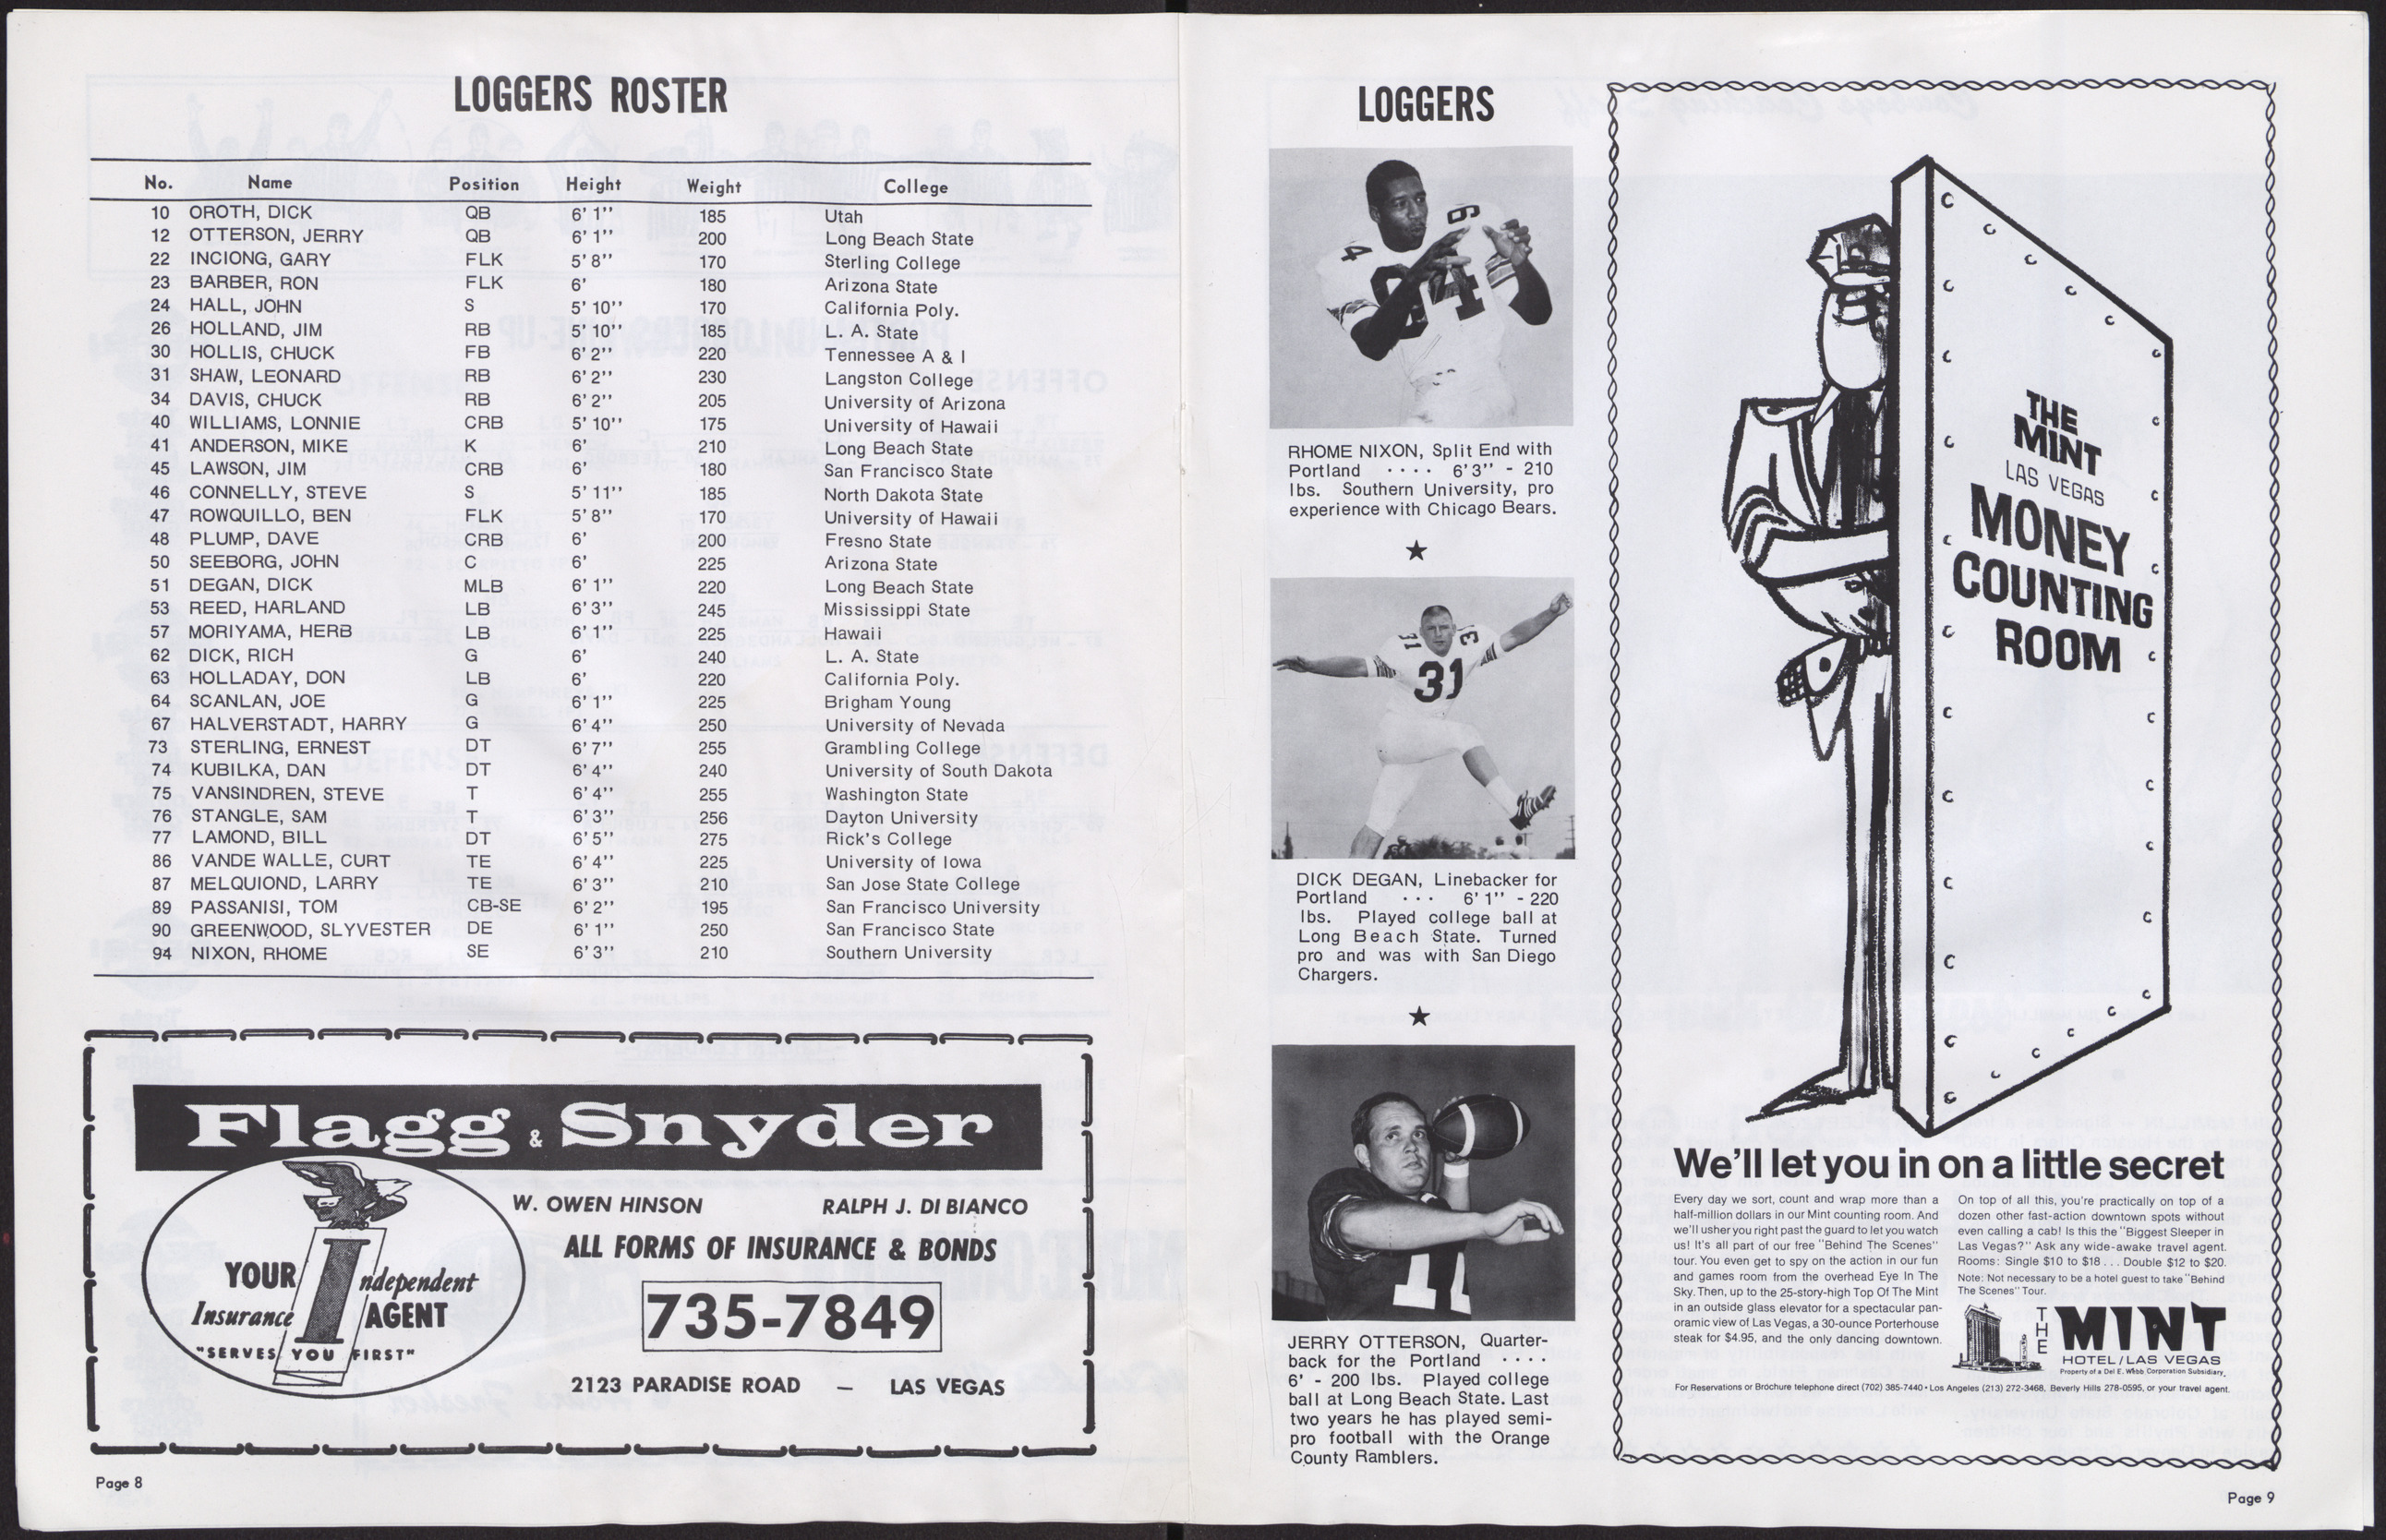 Official Program for the Las Vegas Cowboys vs. Portland Loggers football game (12 pages), August 9, 1969, page 8-9